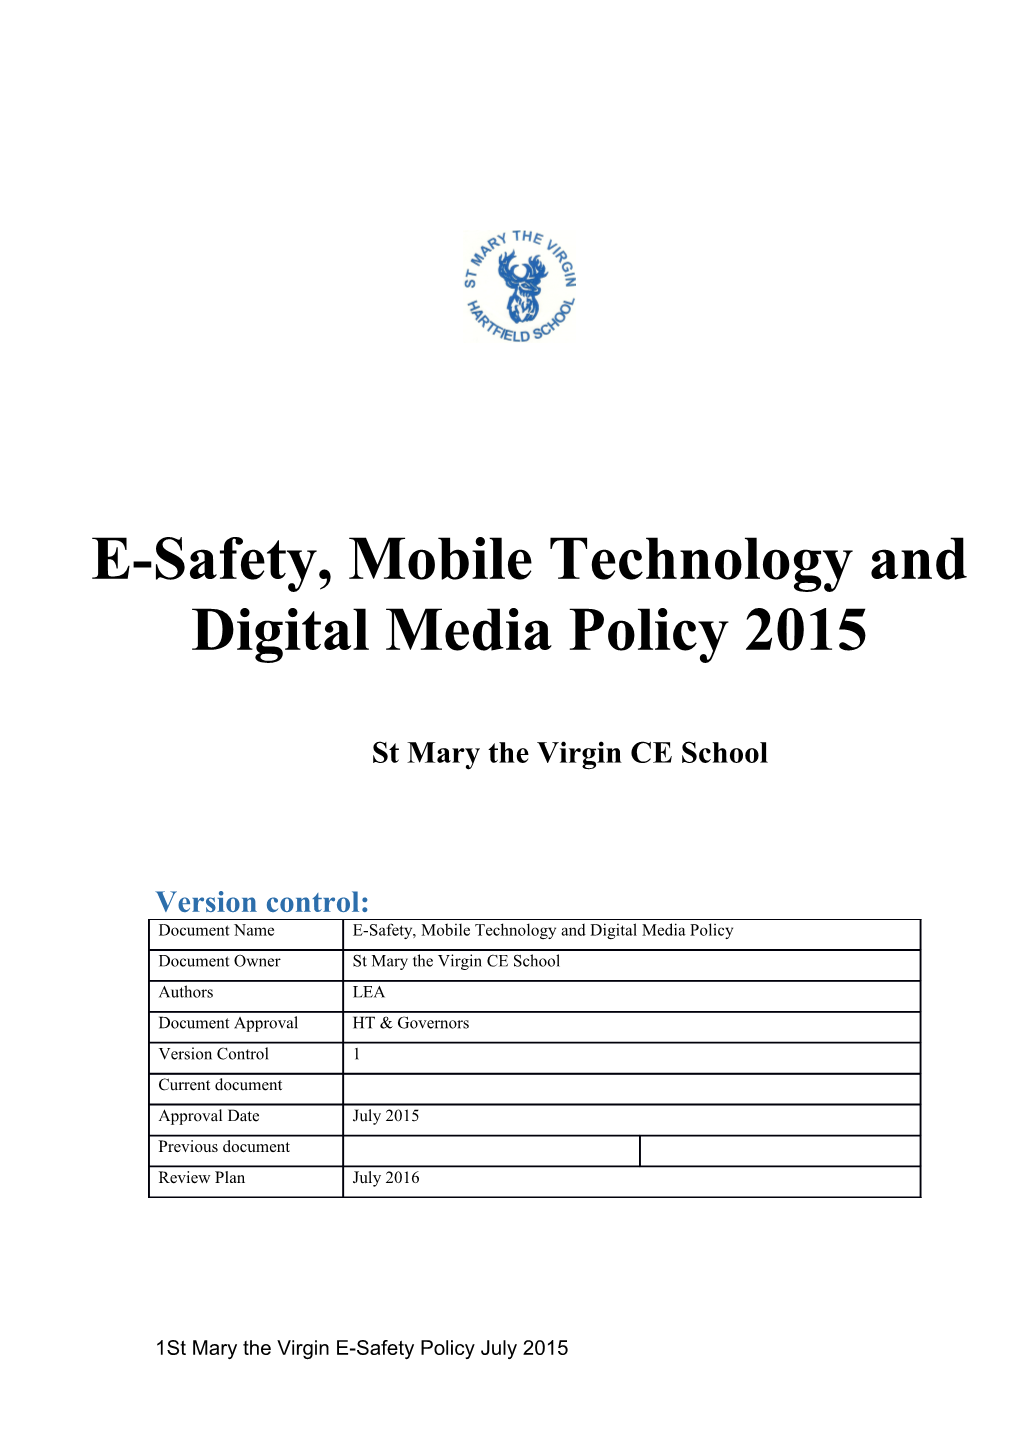 BPSI School E-Safety Policy Template